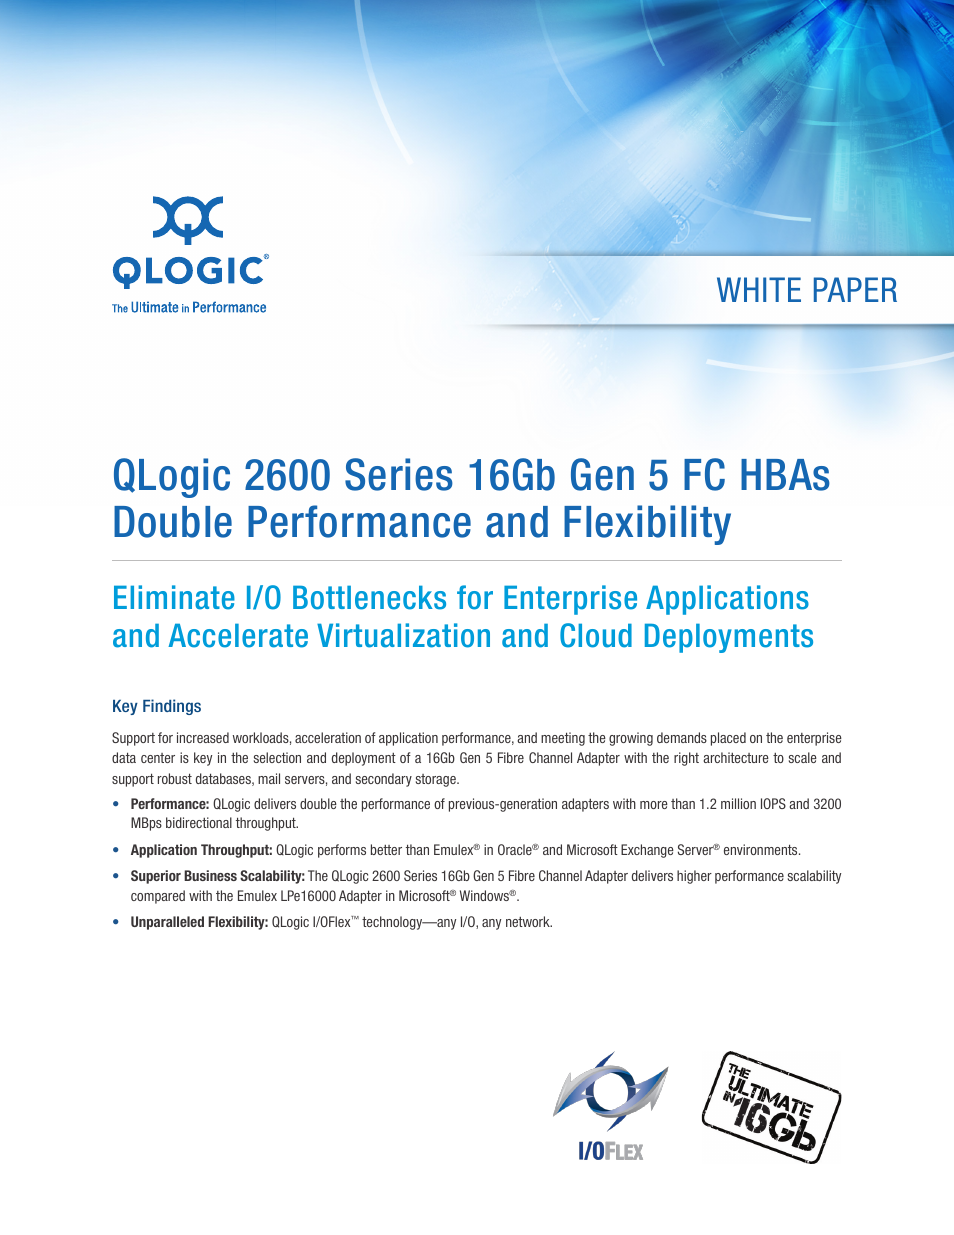 2600 Series 16Gb Gen 5 FC HBAs Double Performance and Flexibility